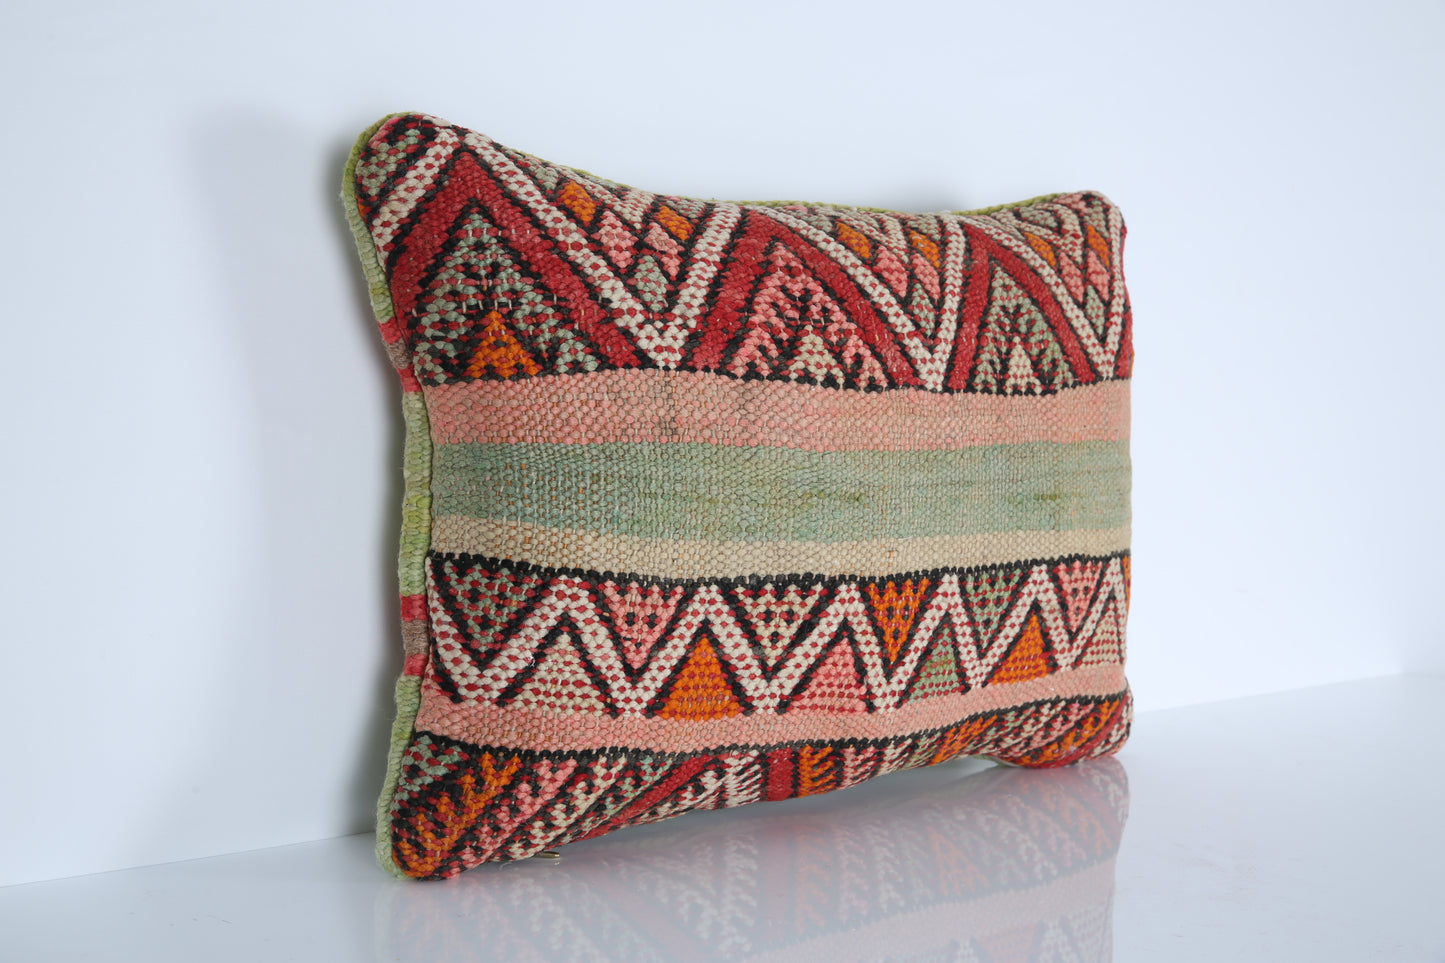 Set of 2 Vintage Pillows Cover 21.6'’ X 14.5’’